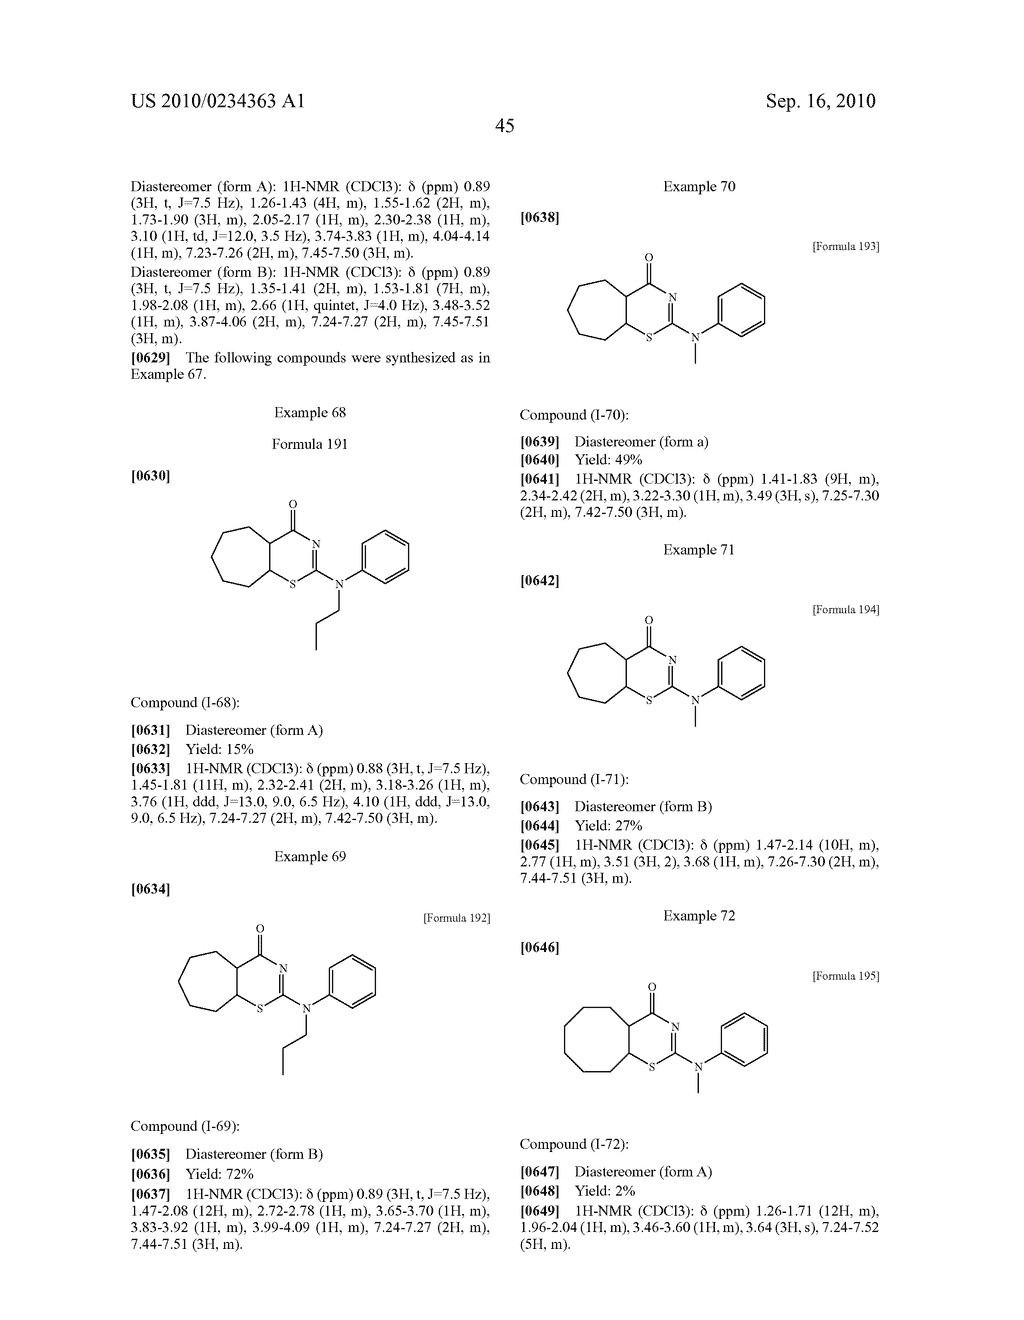 HETEROCYCLIC DERIVATIVE HAVING INHIBITORY ACTIVITY ON TYPE-I 11 DATA-HYDROXYSTEROID DEHYDROGENASE - diagram, schematic, and image 46